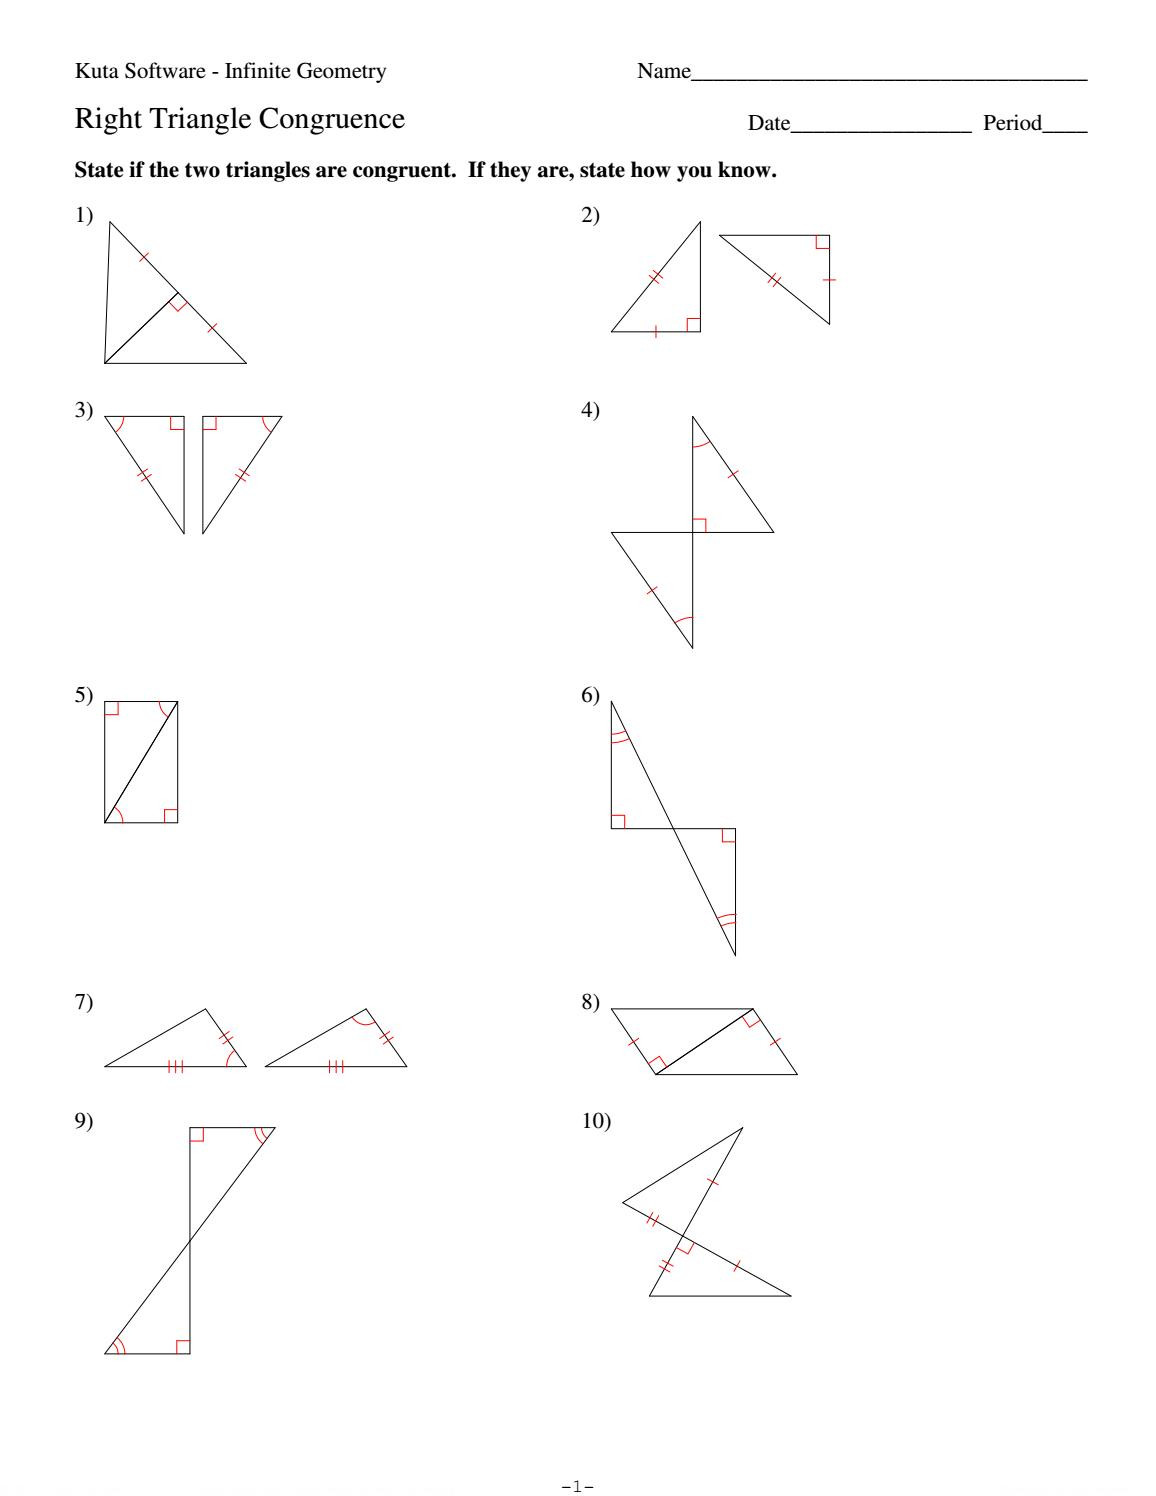 Congruent Triangles Worksheet Answers 4 Right Triangle Congruence by Hhs Geometry issuu